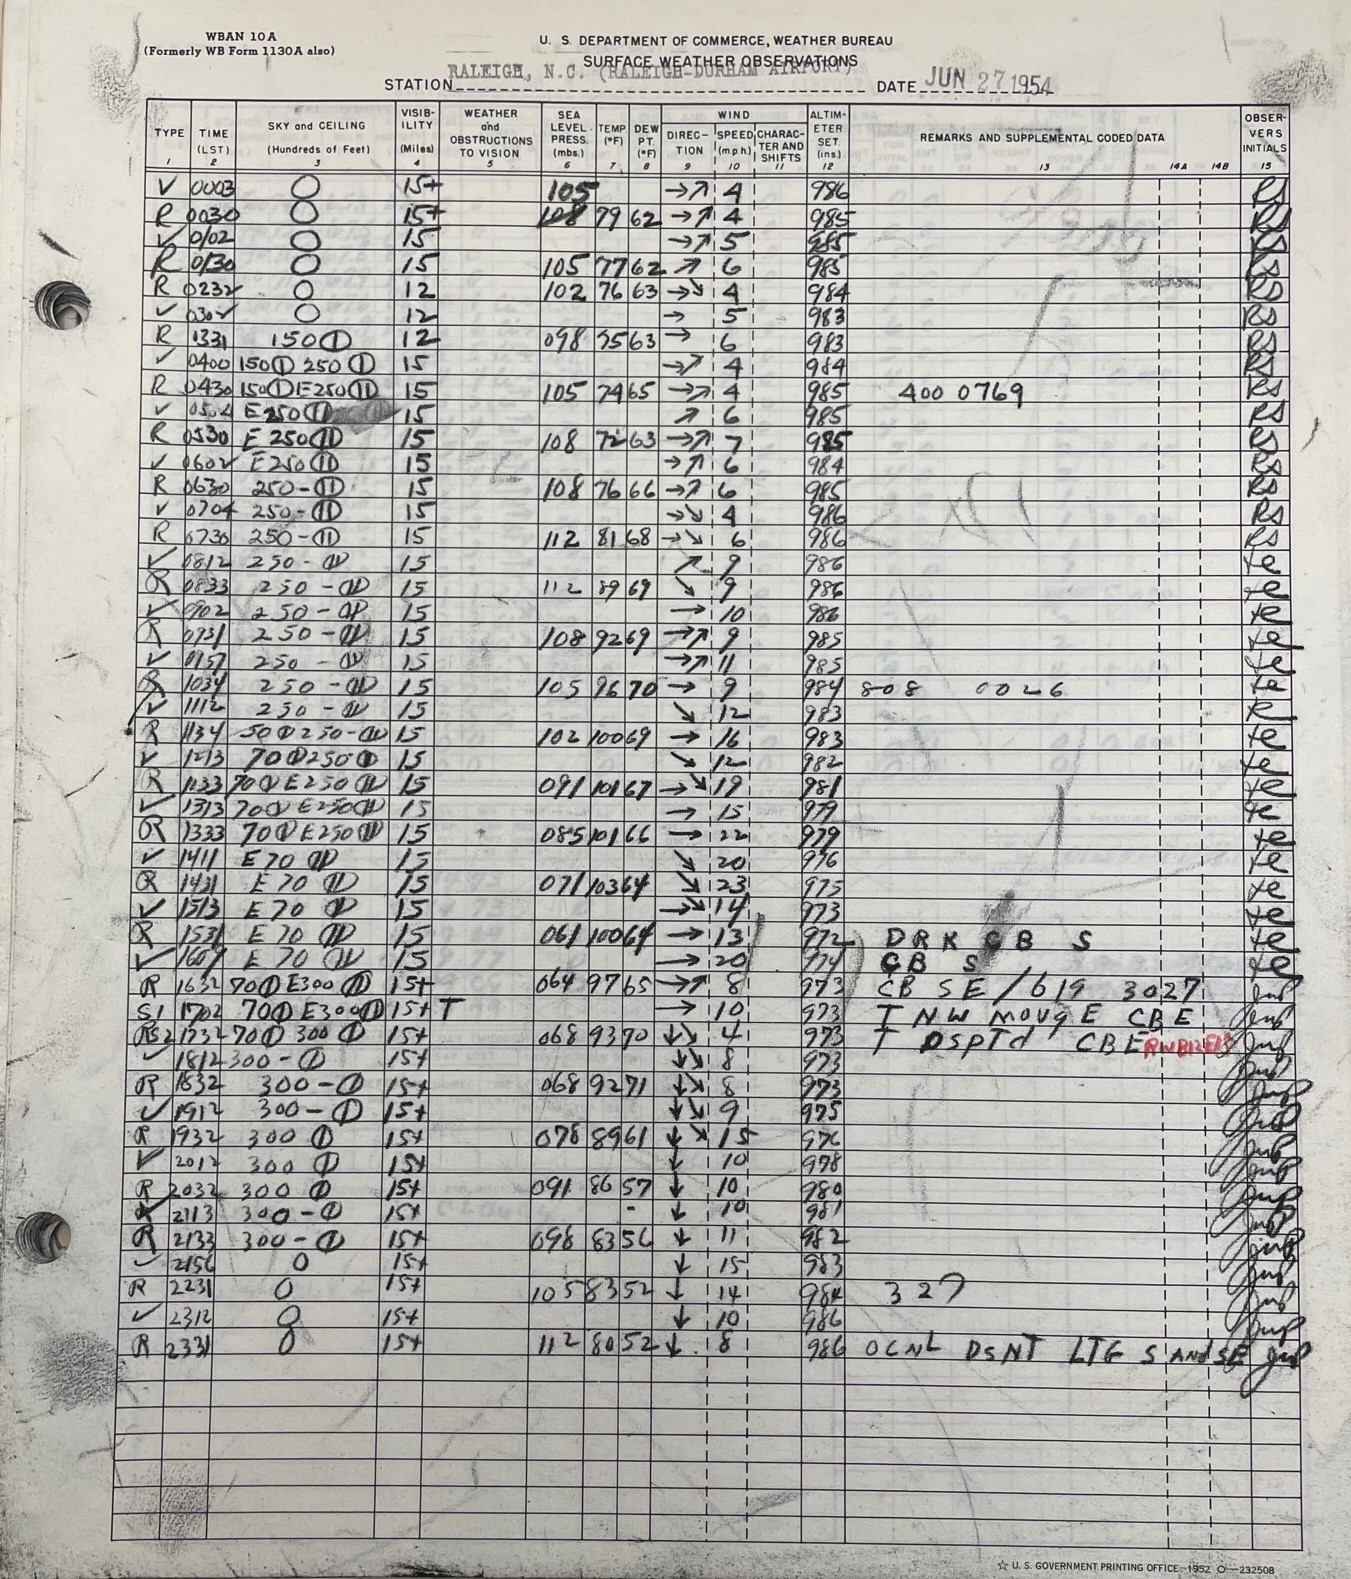 Local Climatological Data for Raleigh, N.C., 1954, from the United States Weather Bureau, Raleigh Office Records, Weather Bureau Weather Report, Vol. 68.